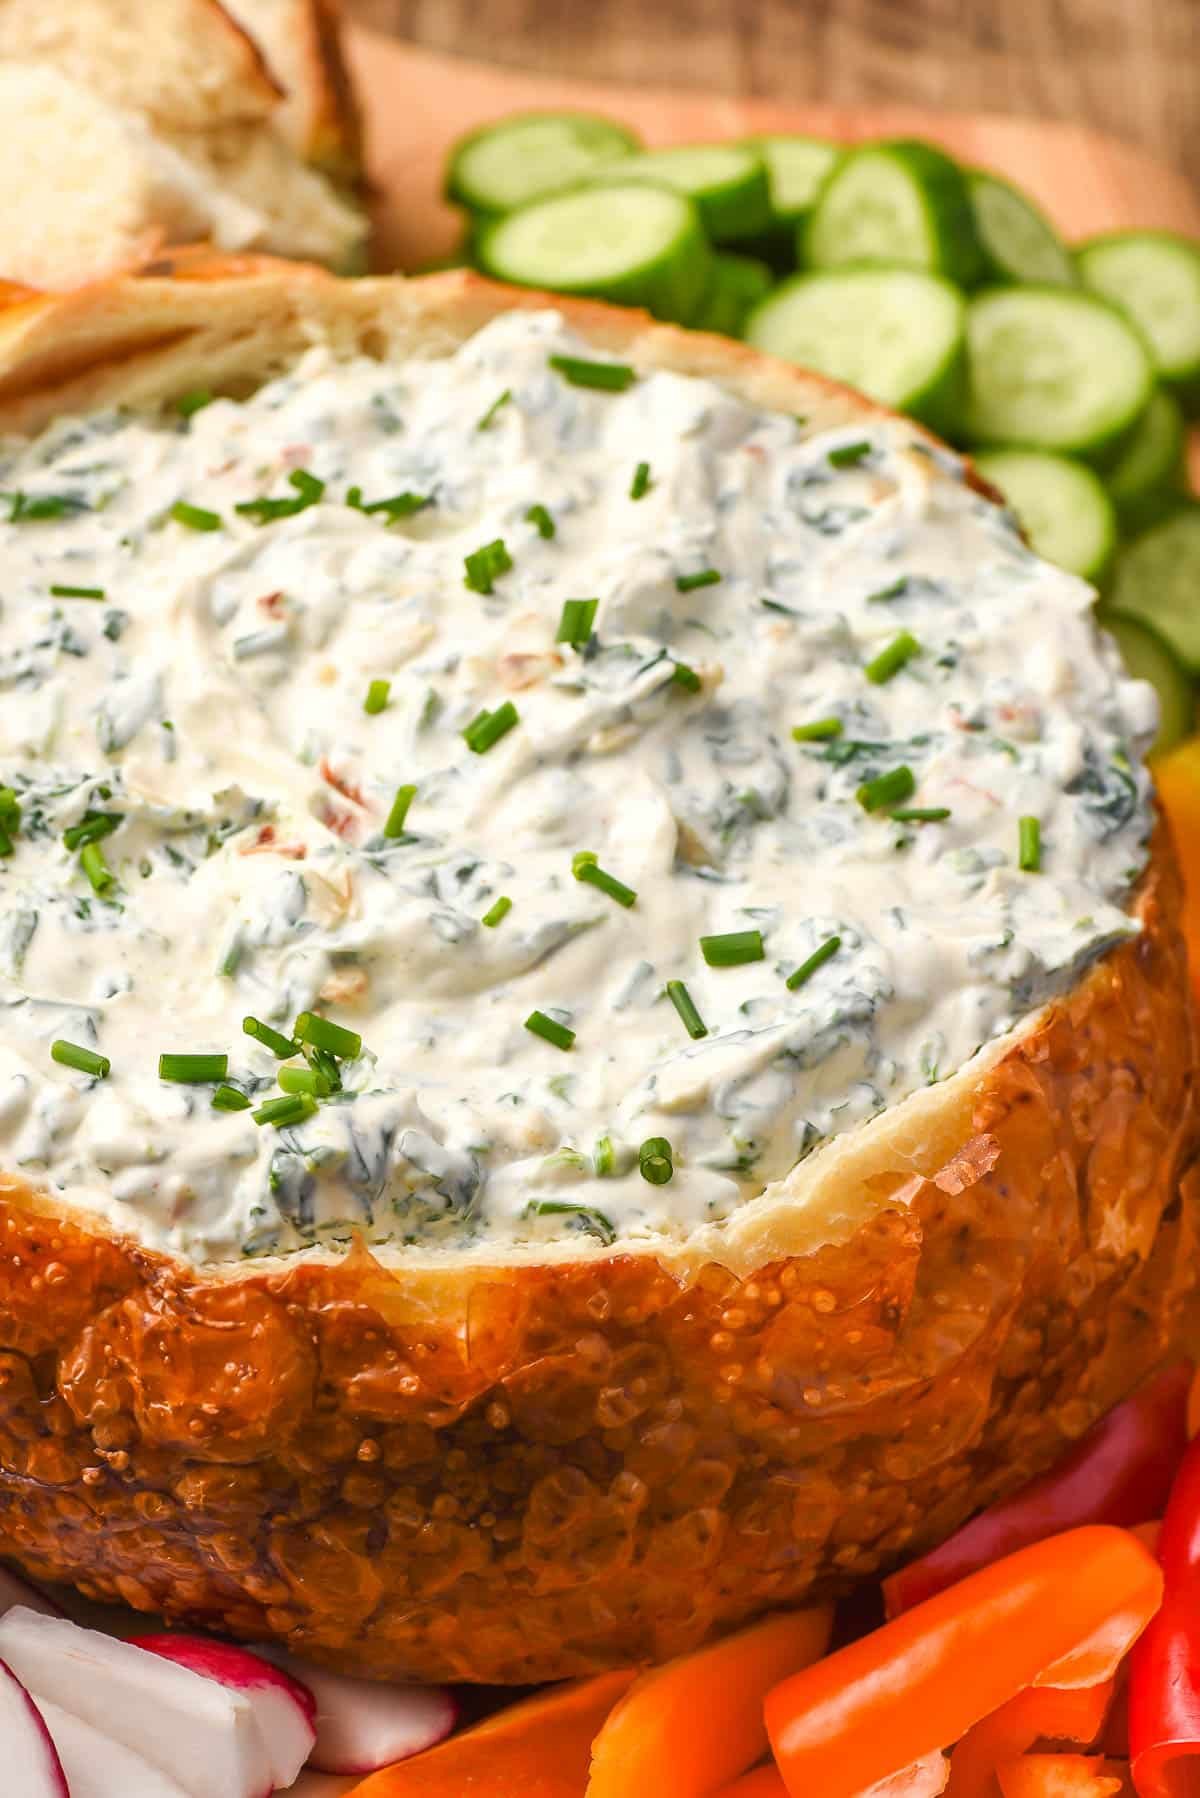 Cold spinach dip in a bread bowl with fresh cut veggies.